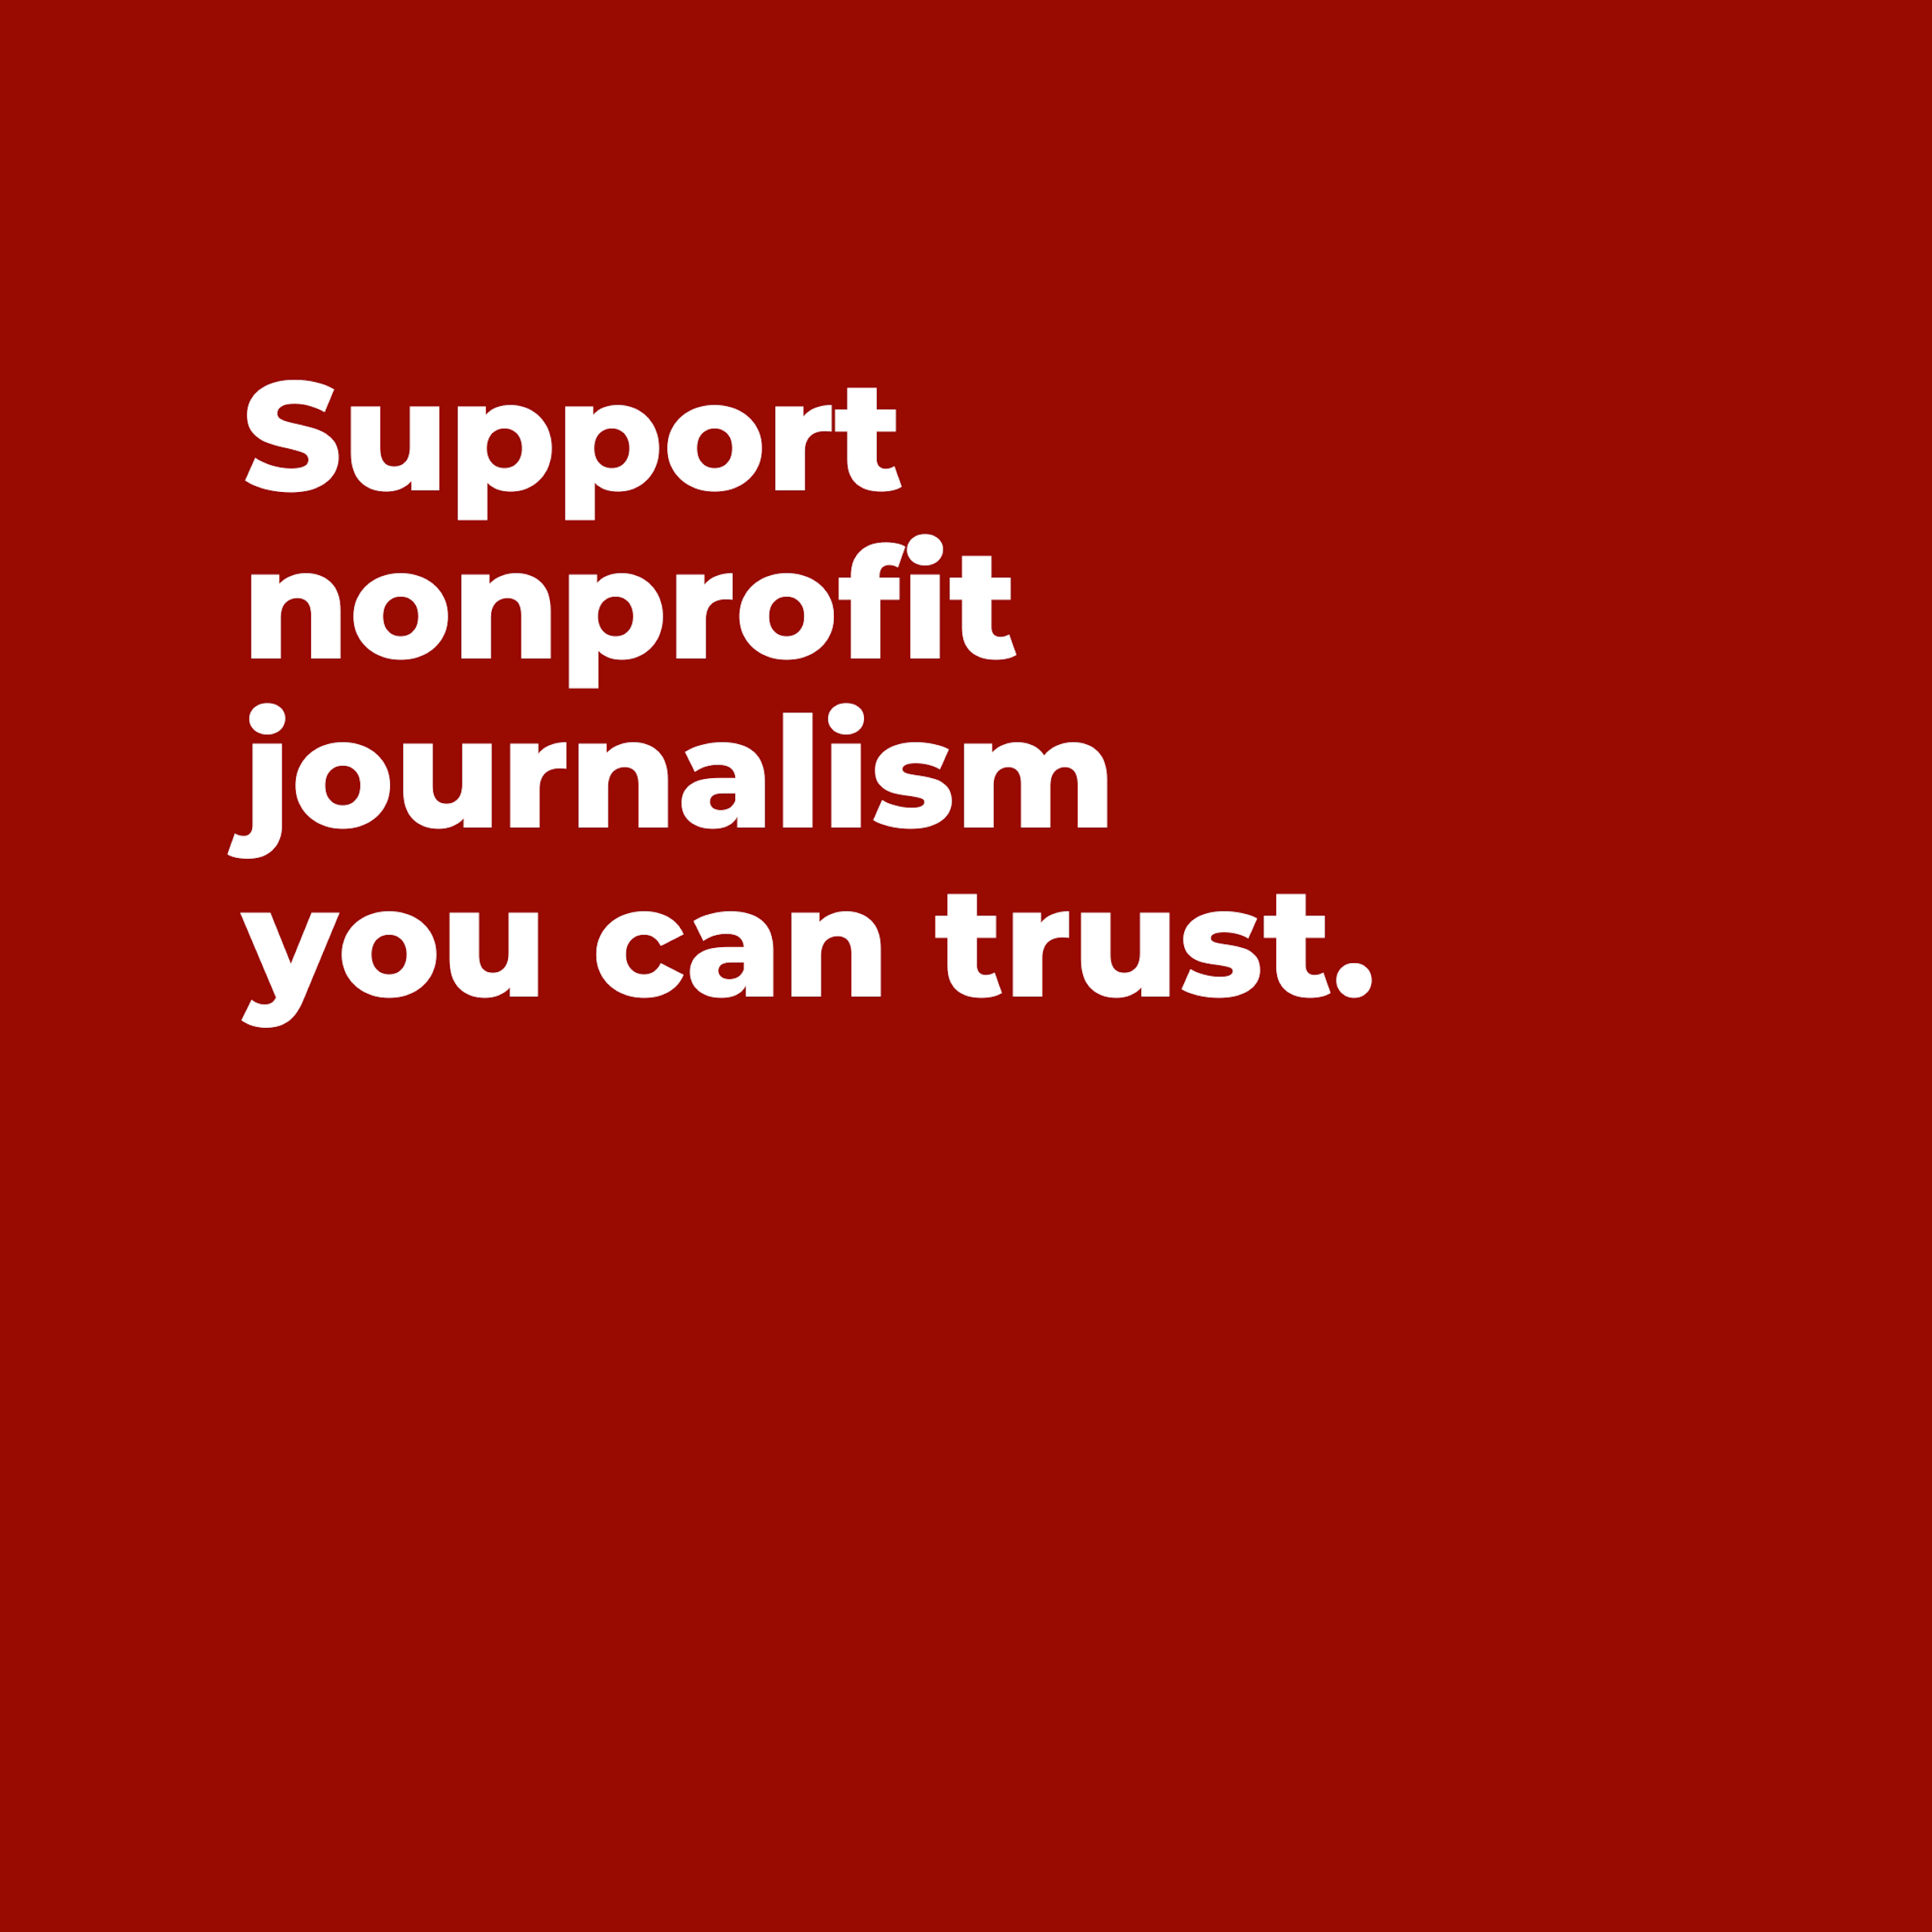 Graphic with the words "Support nonprofit journalism you can trust."